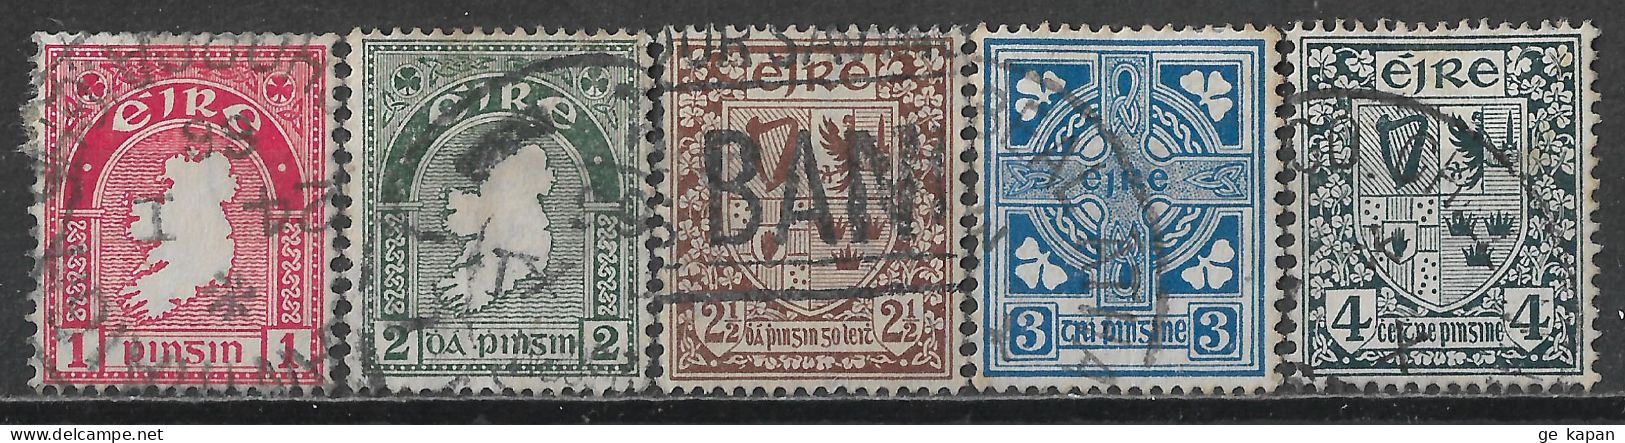 1940-1941 IRELAND SET OF 5 USED STAMPS (Michel # 72A,74A,75A,76AI,77A) CV €1.80 - Usados